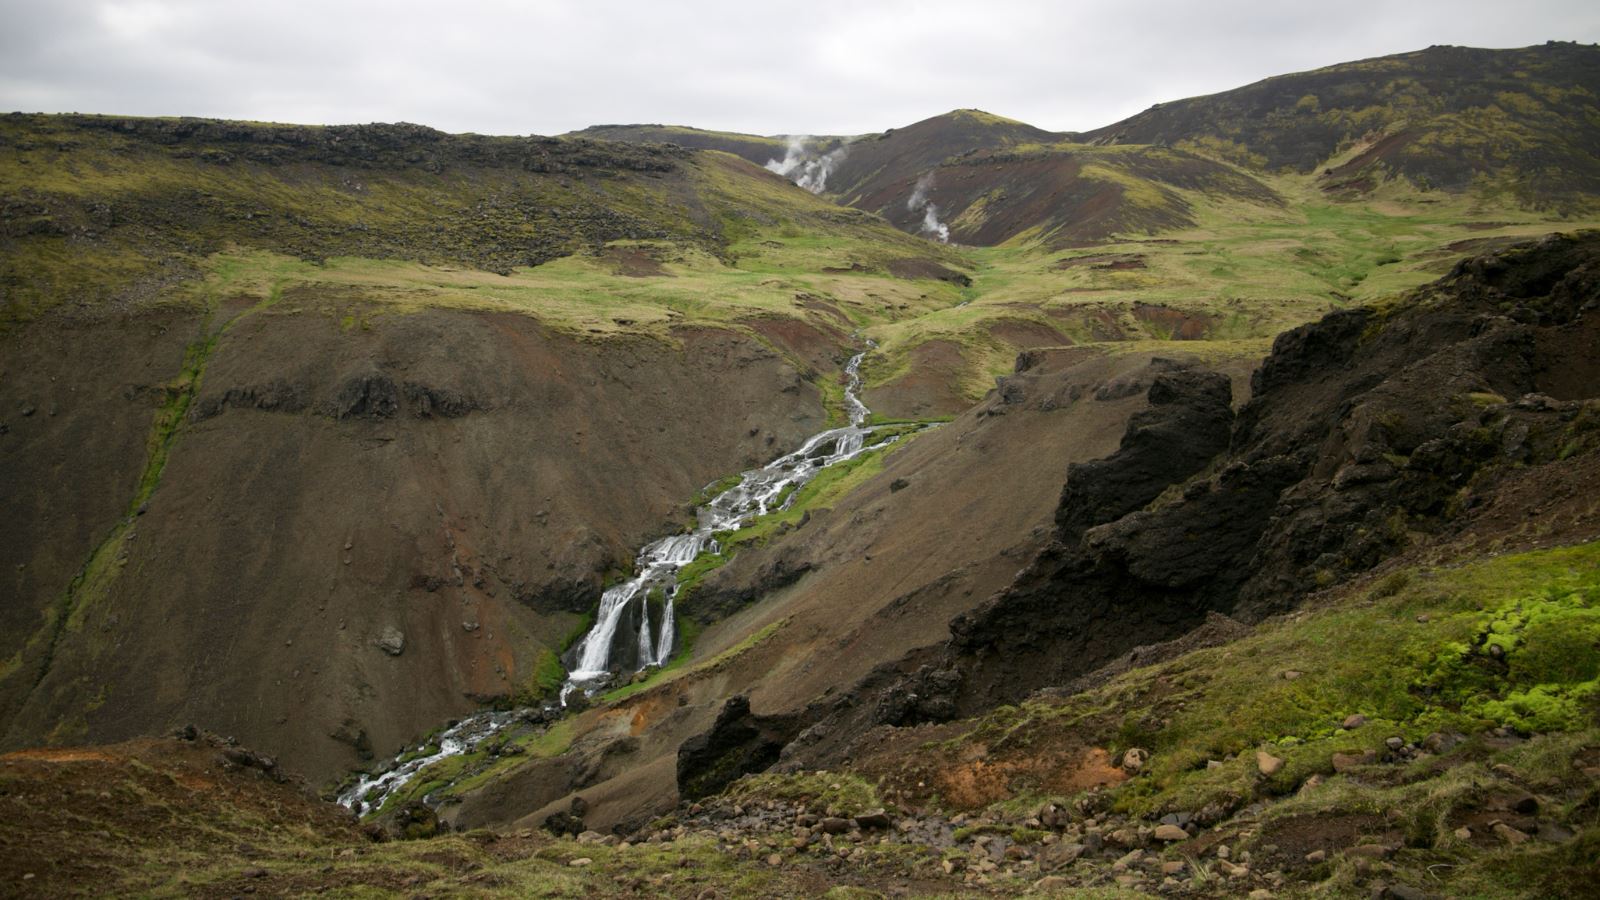 Water trickling through the hills from the steaming Reykjadalur Valley